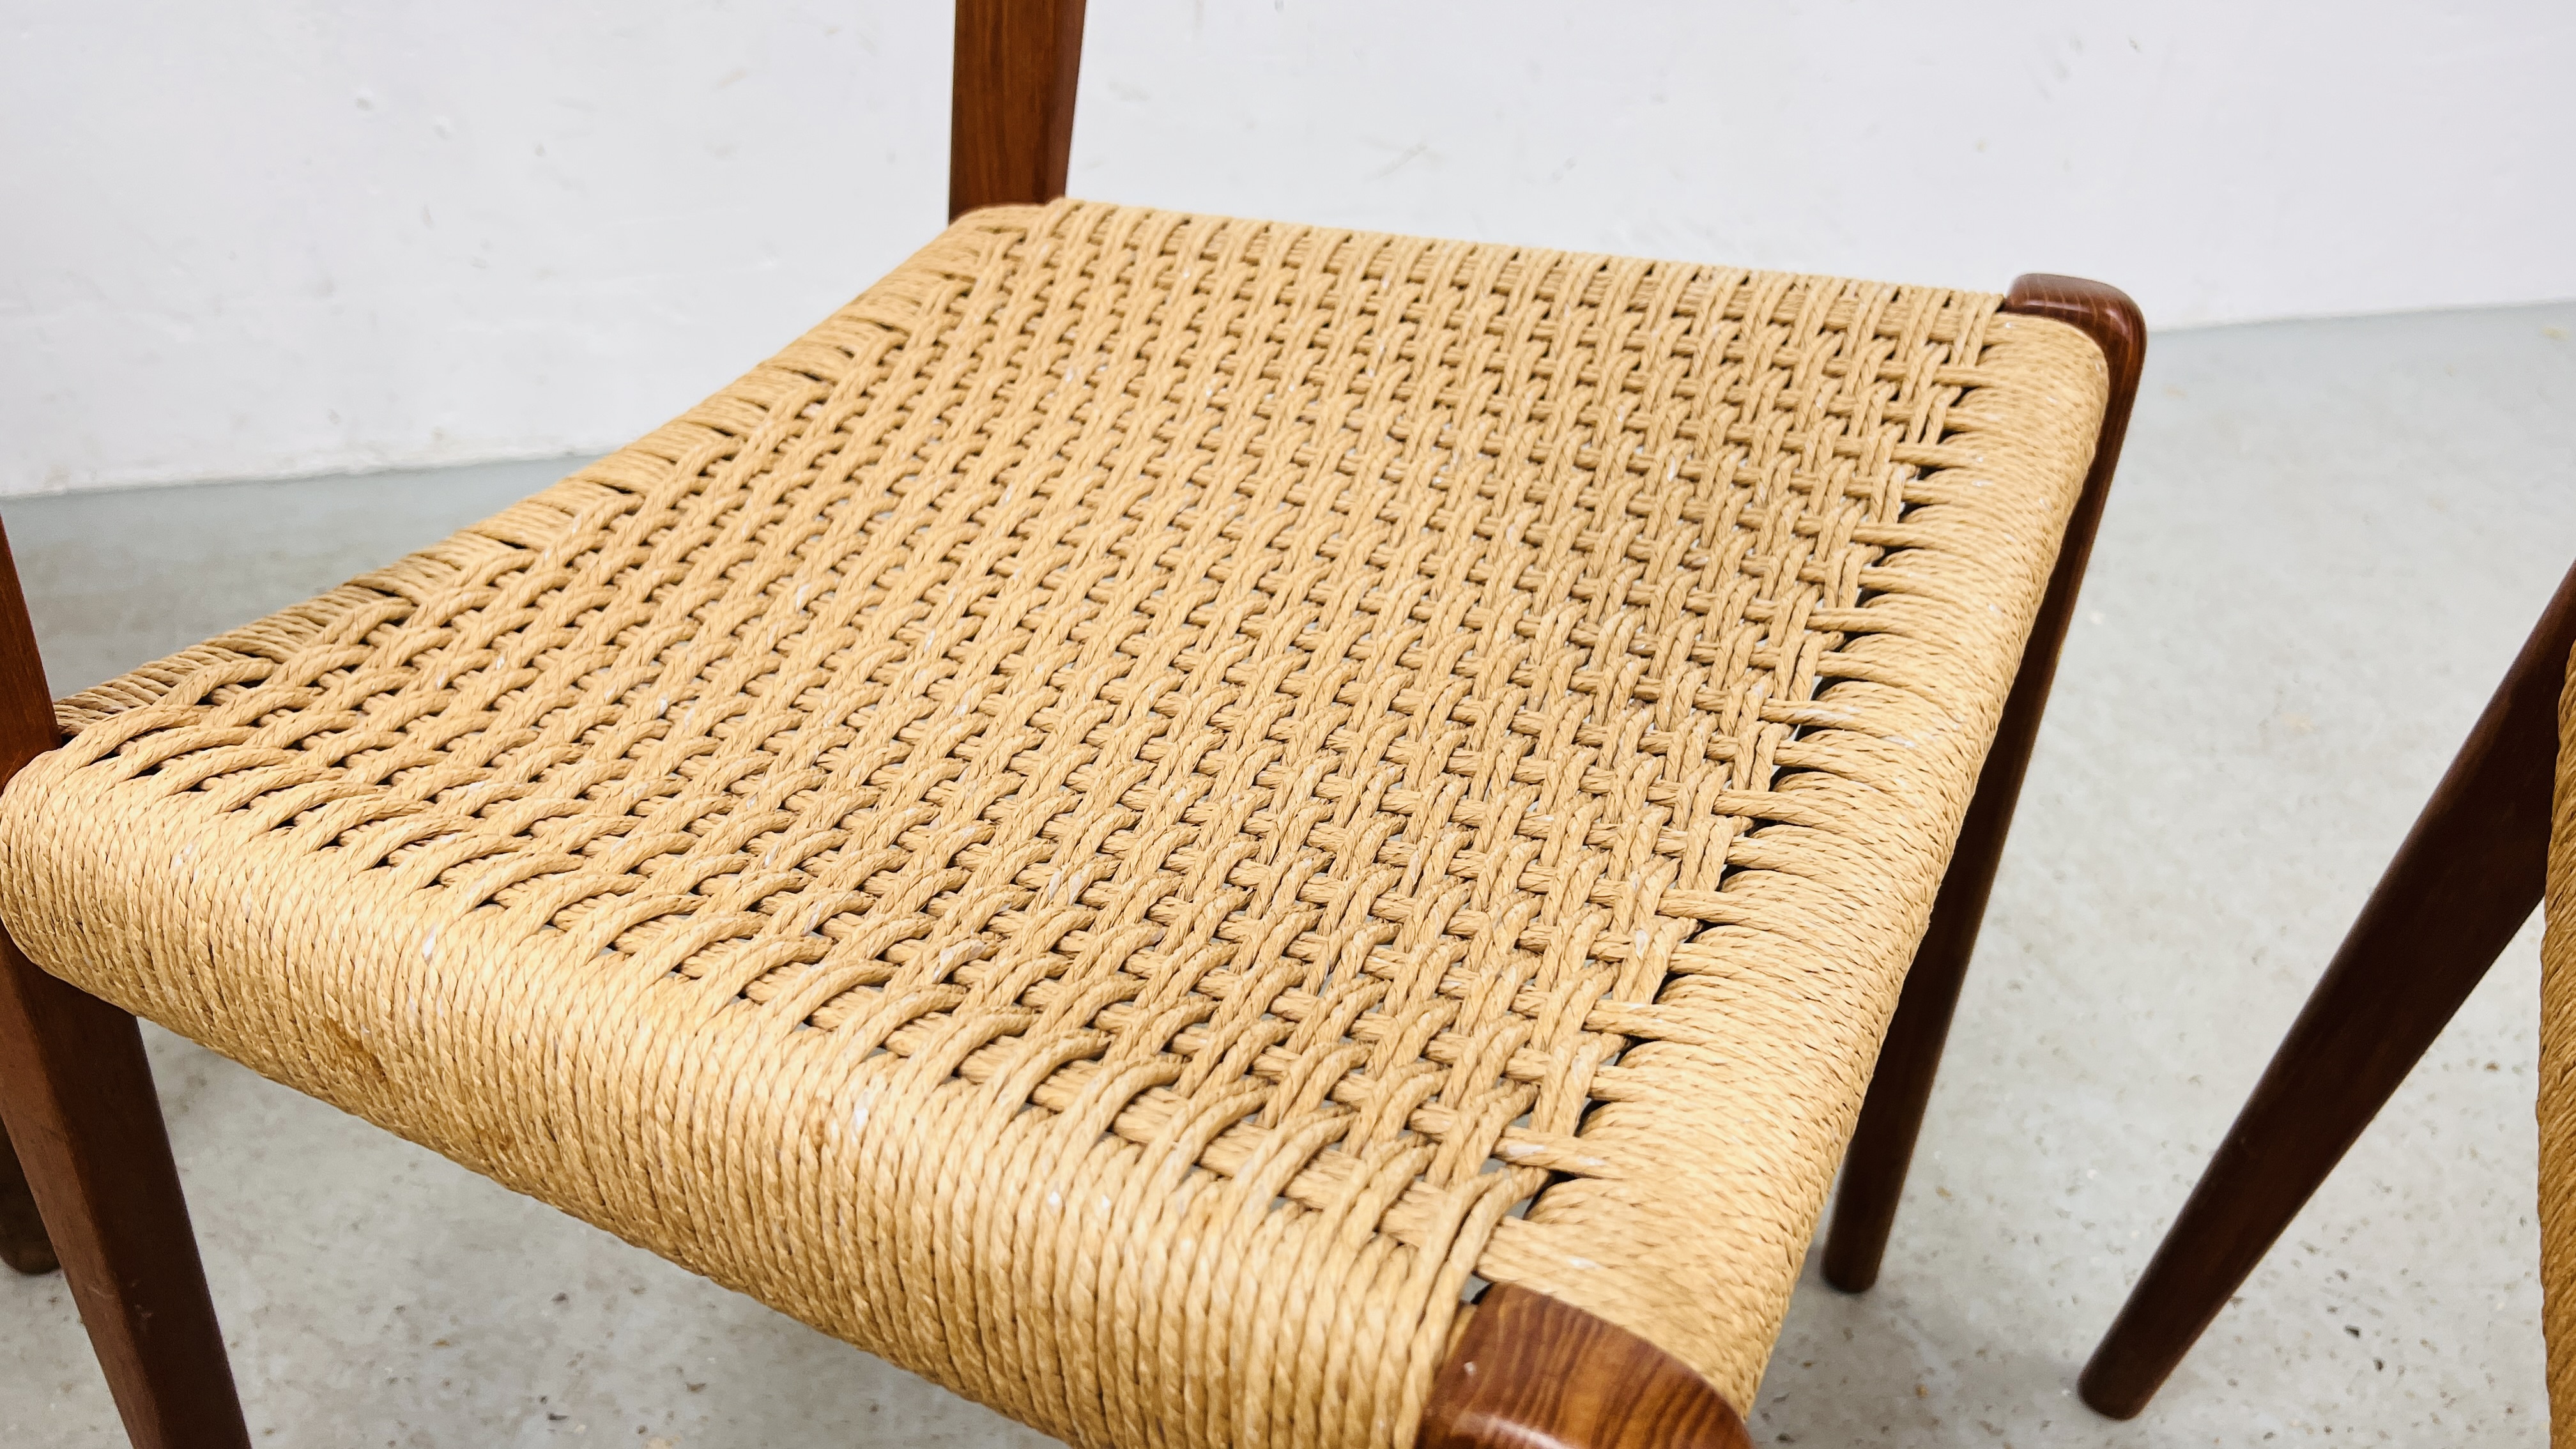 SET OF EIGHT J MOLLER DANISH TEAK DINING CHAIRS WITH WOVEN SISAL SEATS ALONG WITH A DRAWER LEAF - Image 30 of 48